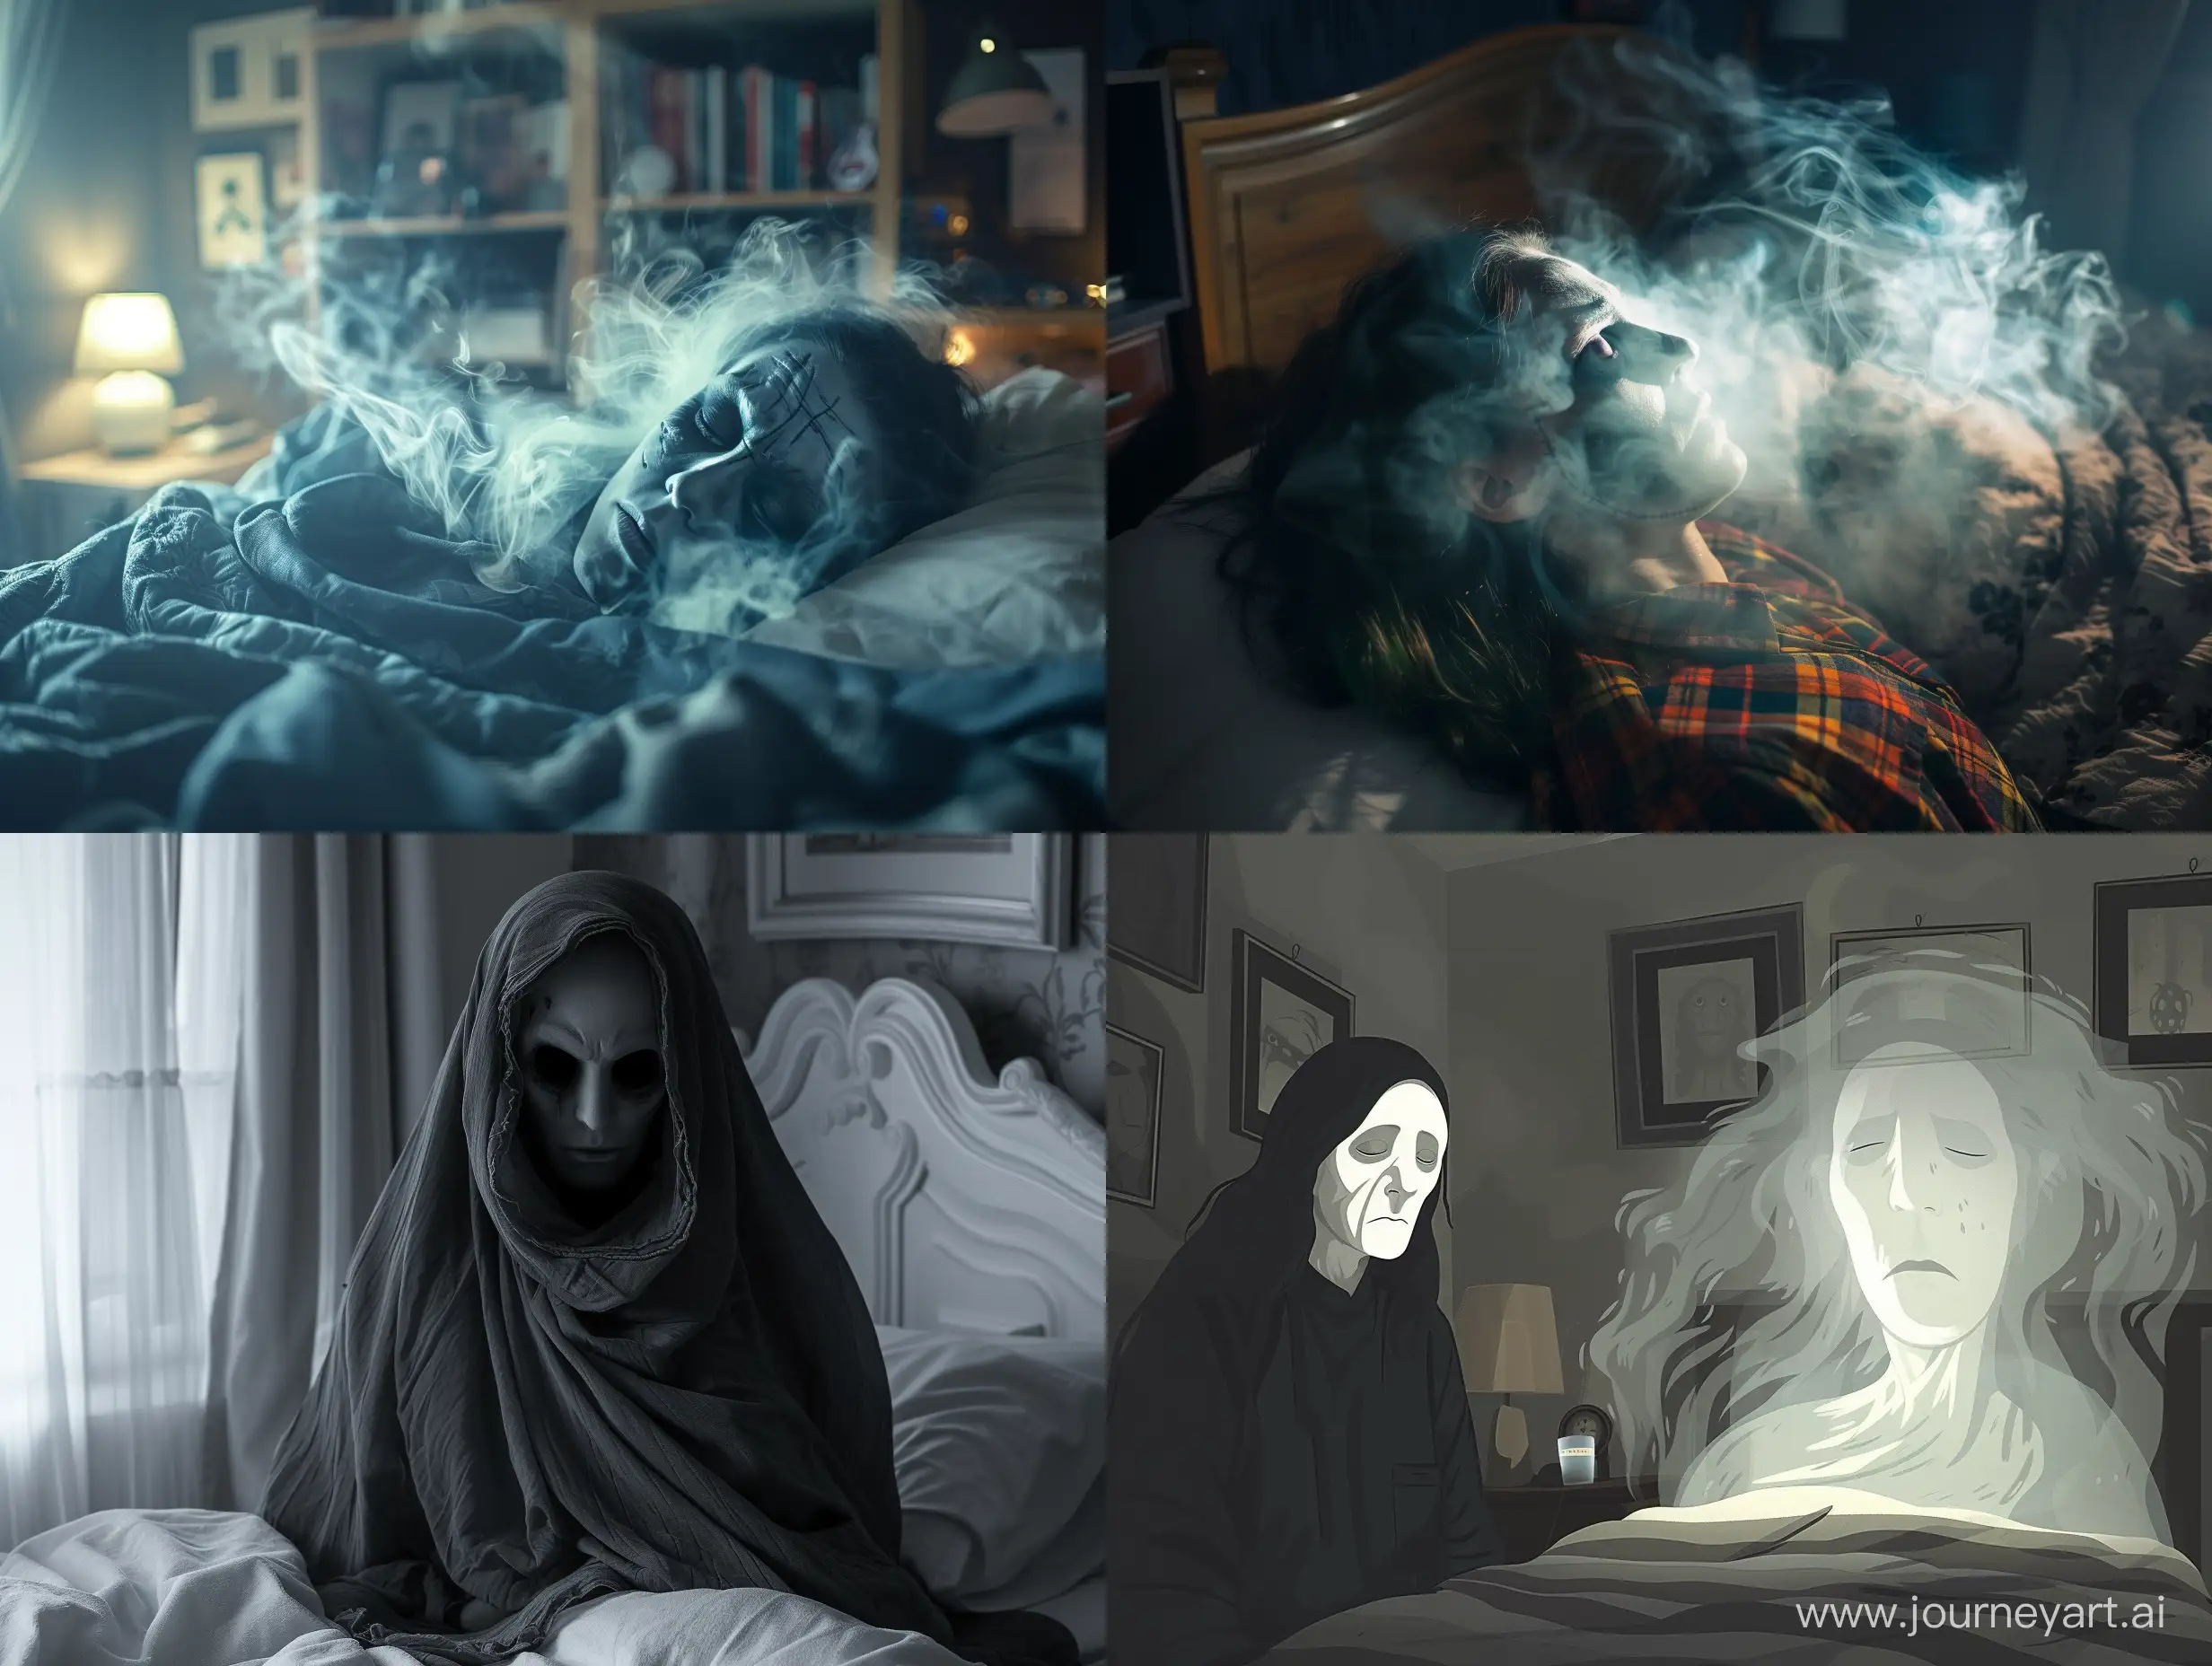 Ethereal-Faceless-Demon-Haunting-Man-in-Spooky-Bedroom